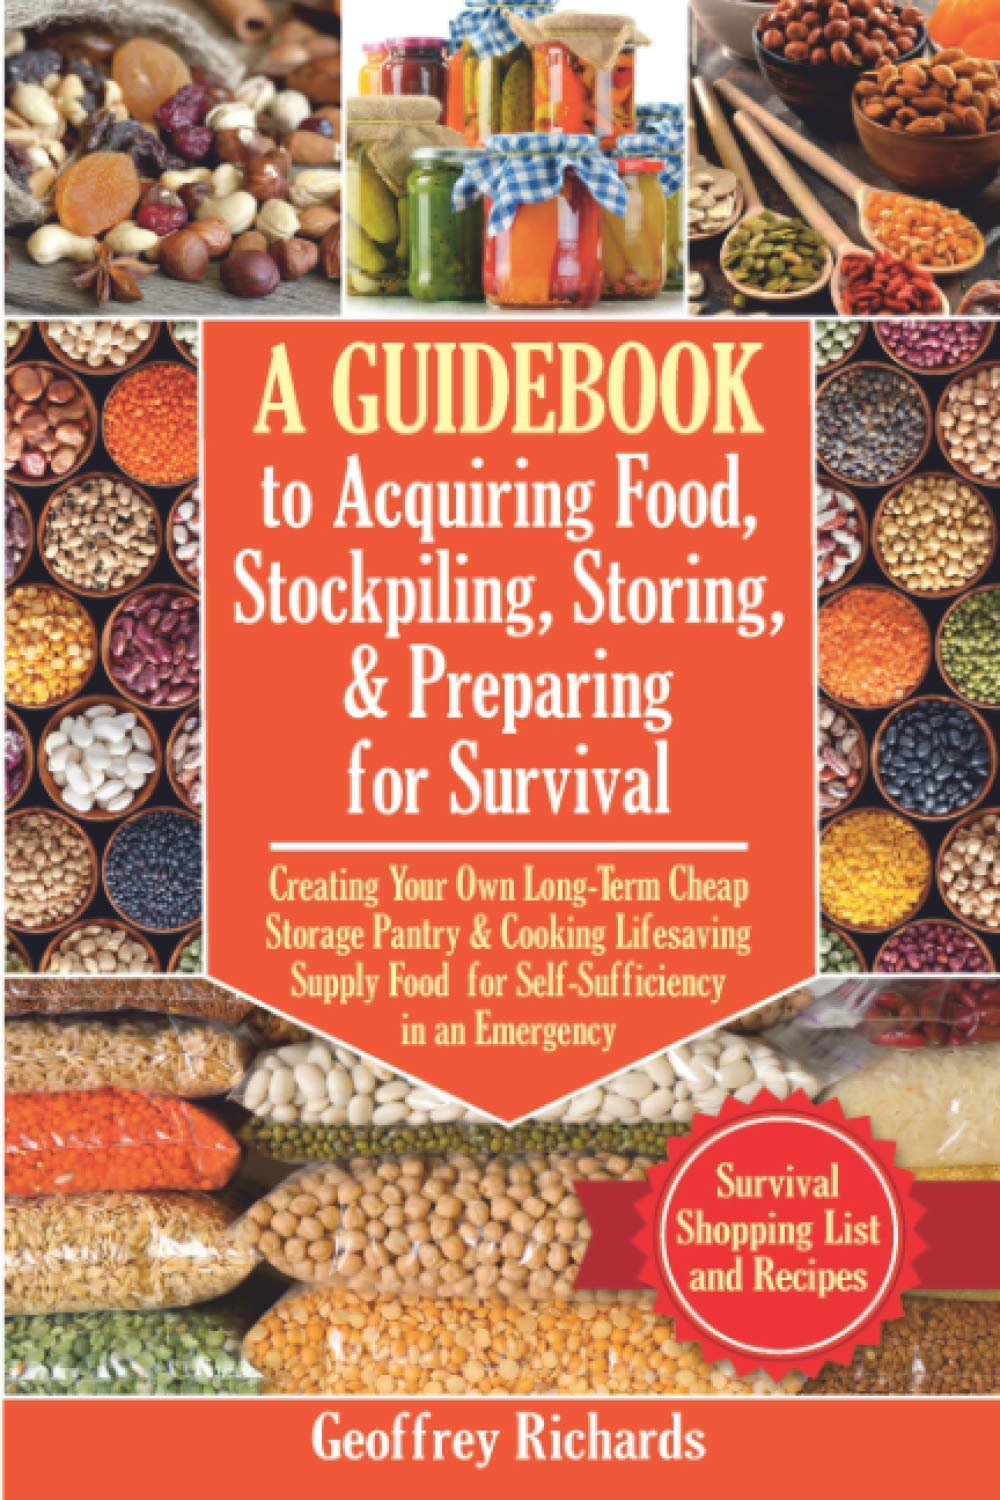 A Guidebook to Acquiring Food, Stockpiling, Storing, and Preparing for Survival: Creating Your Own Long-Term Cheap Storage Pantry and Cooking … an Emergency. Survival Food List and Recipes